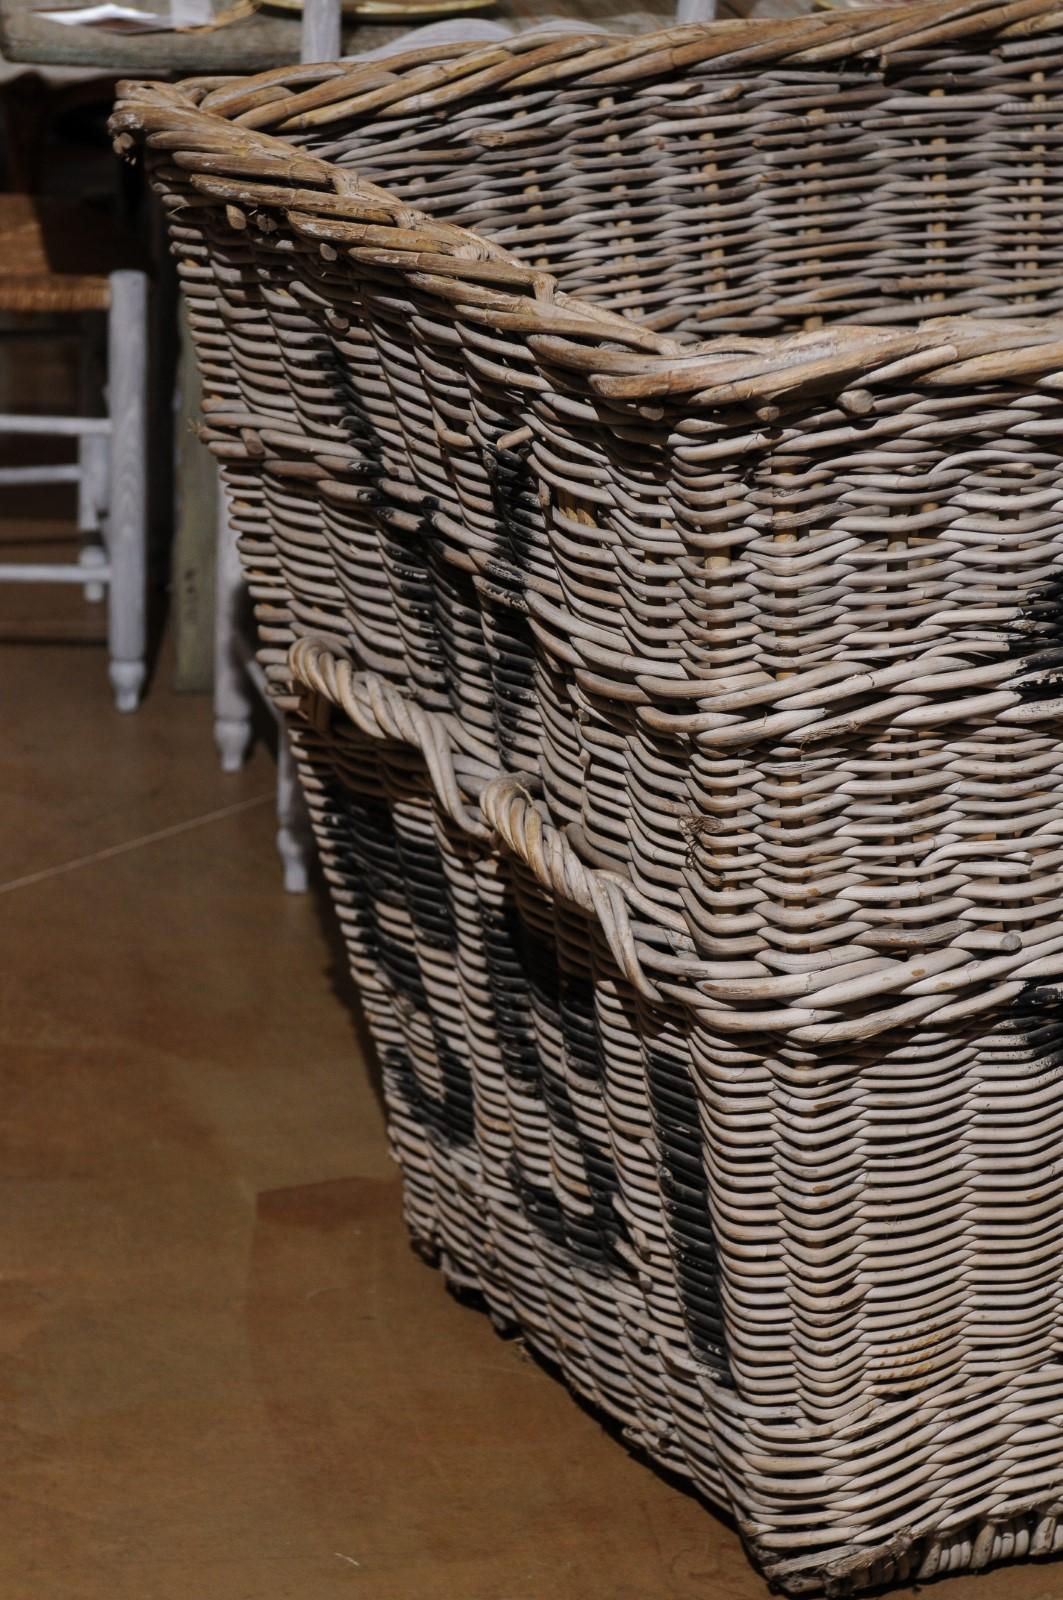 Rustic English 19th Century Reclaimed Wicker Mill Basket with Weathered Appearance